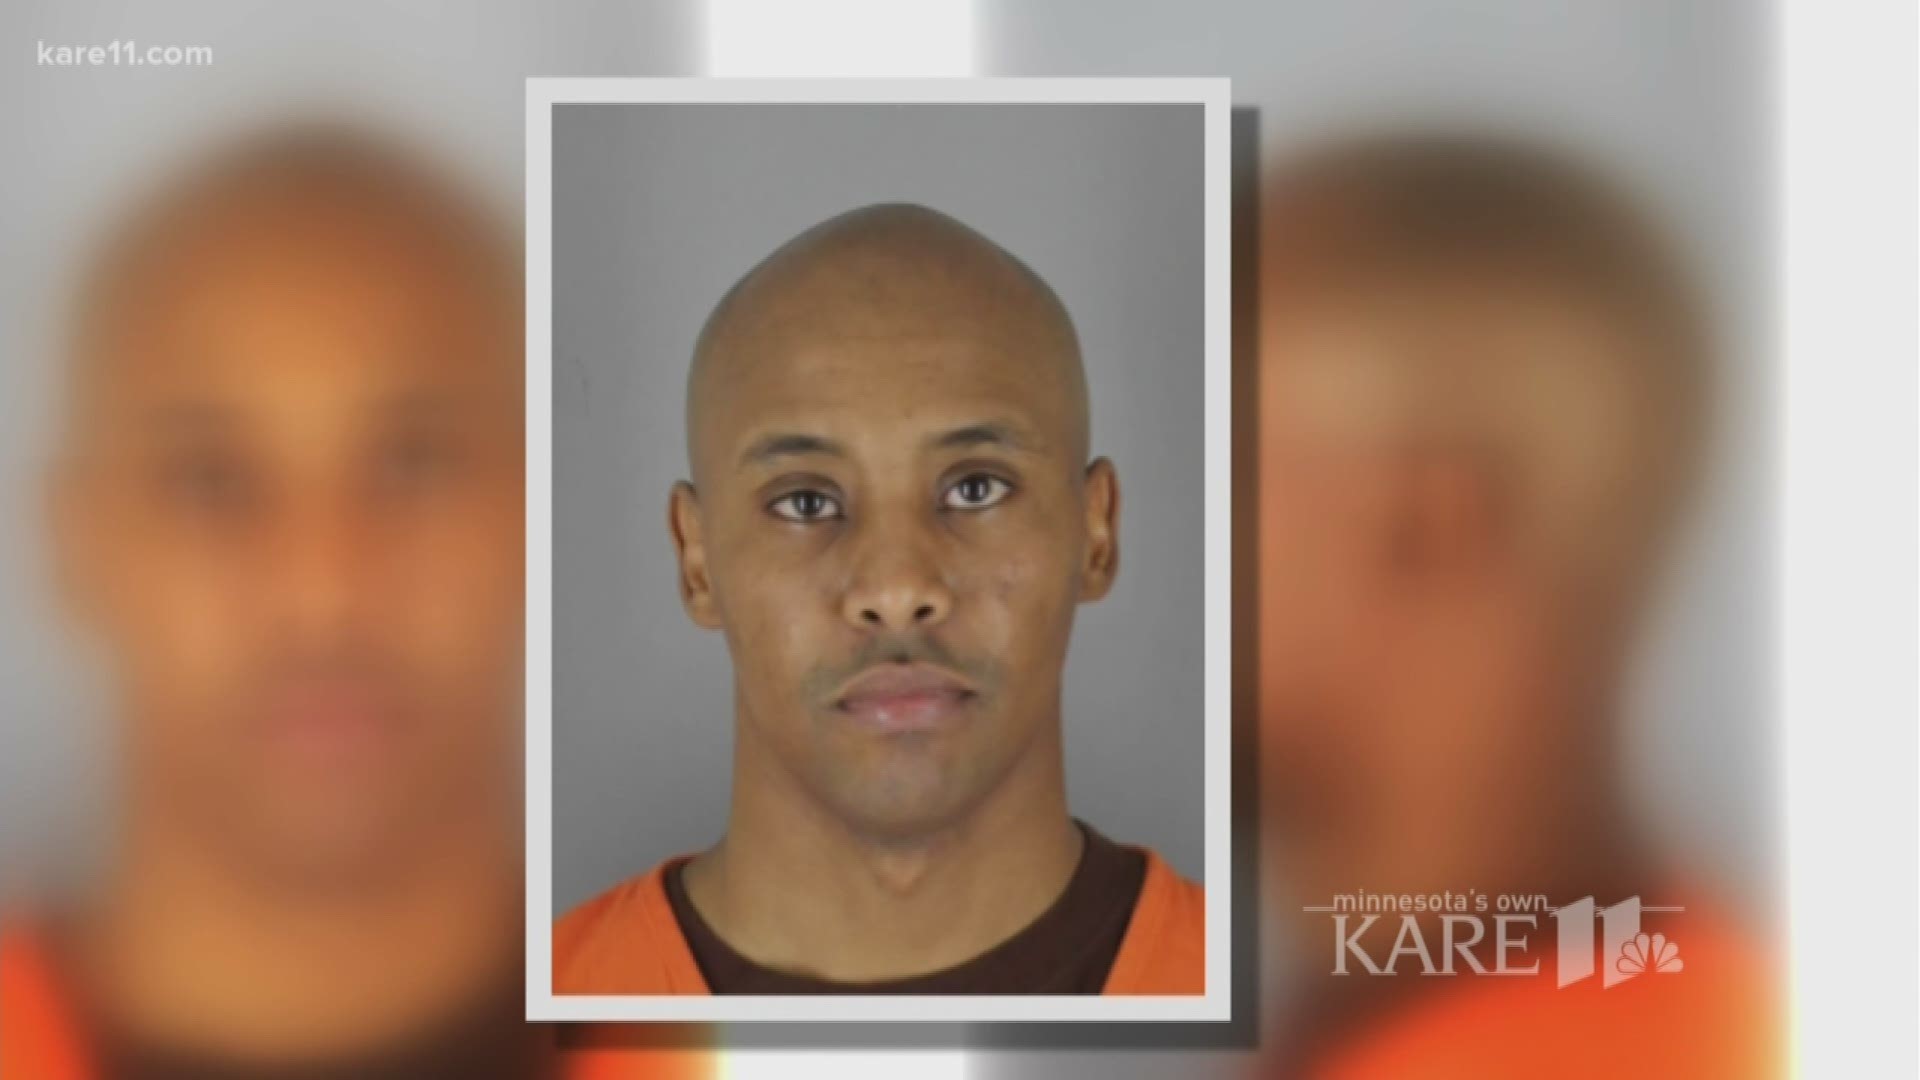 Reckless and intentional. That's how prosecutors describe Officer Mohamed Noor's decision to fire his handgun last July when he shot and killed Justine Damond. http://kare11.tv/2u7yFEk